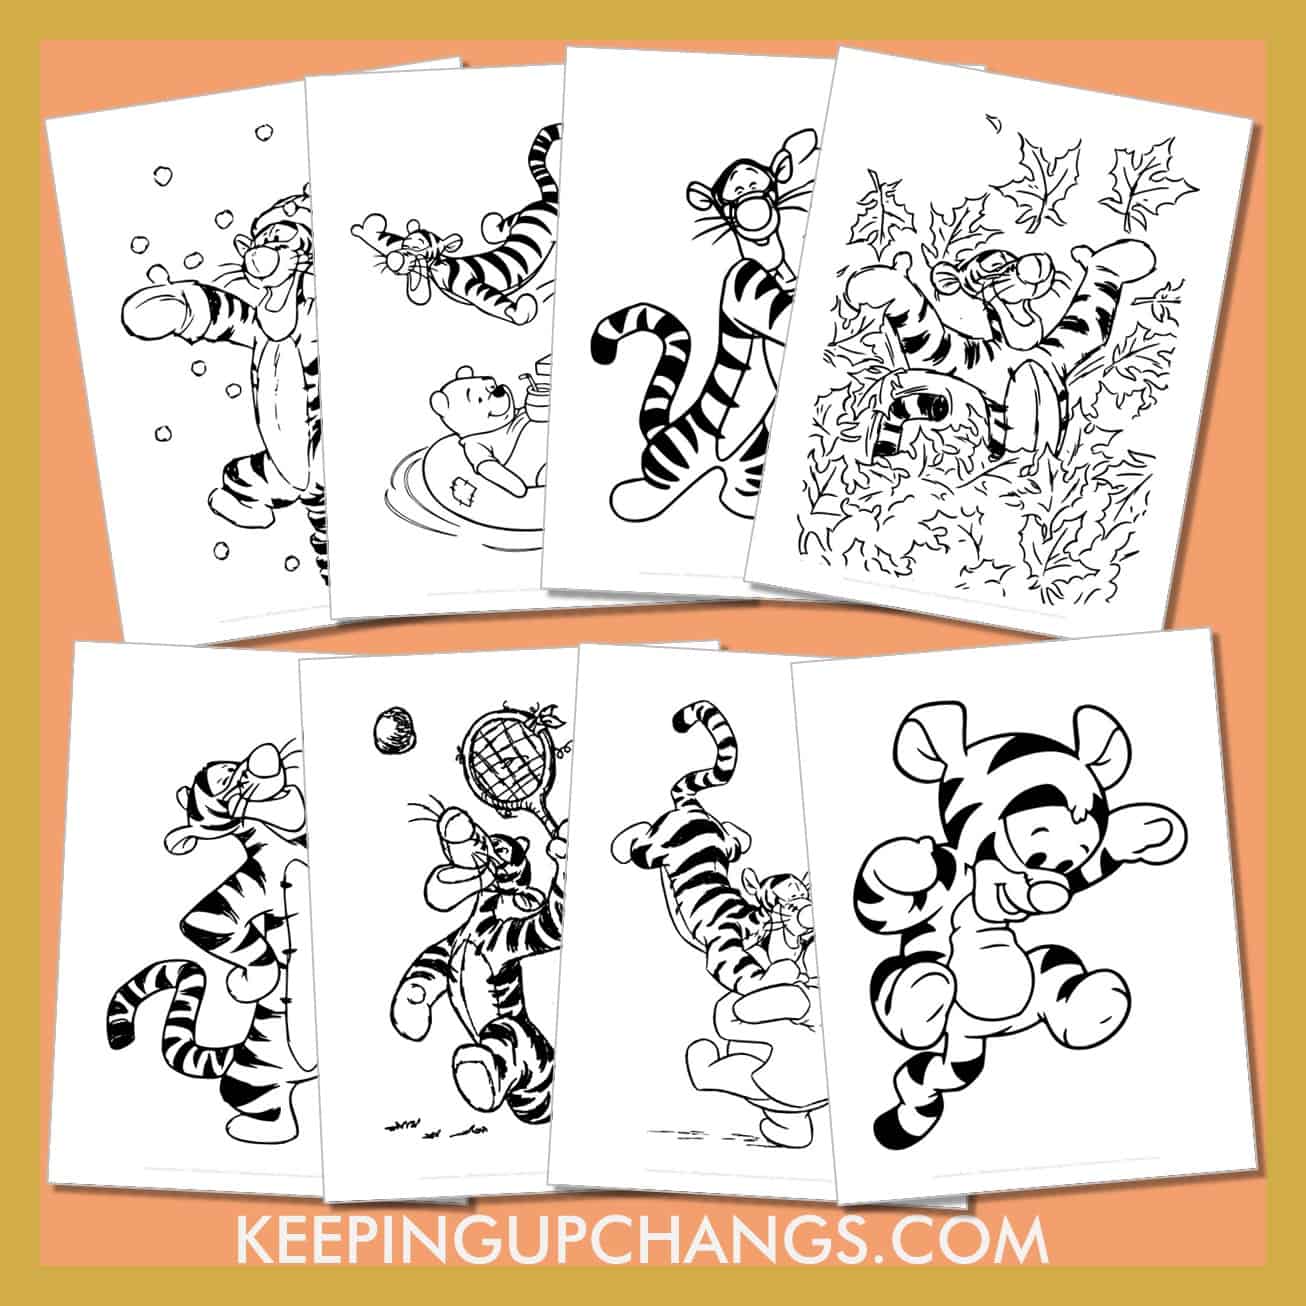 free tigger pictures to color for toddlers, kids, adults.